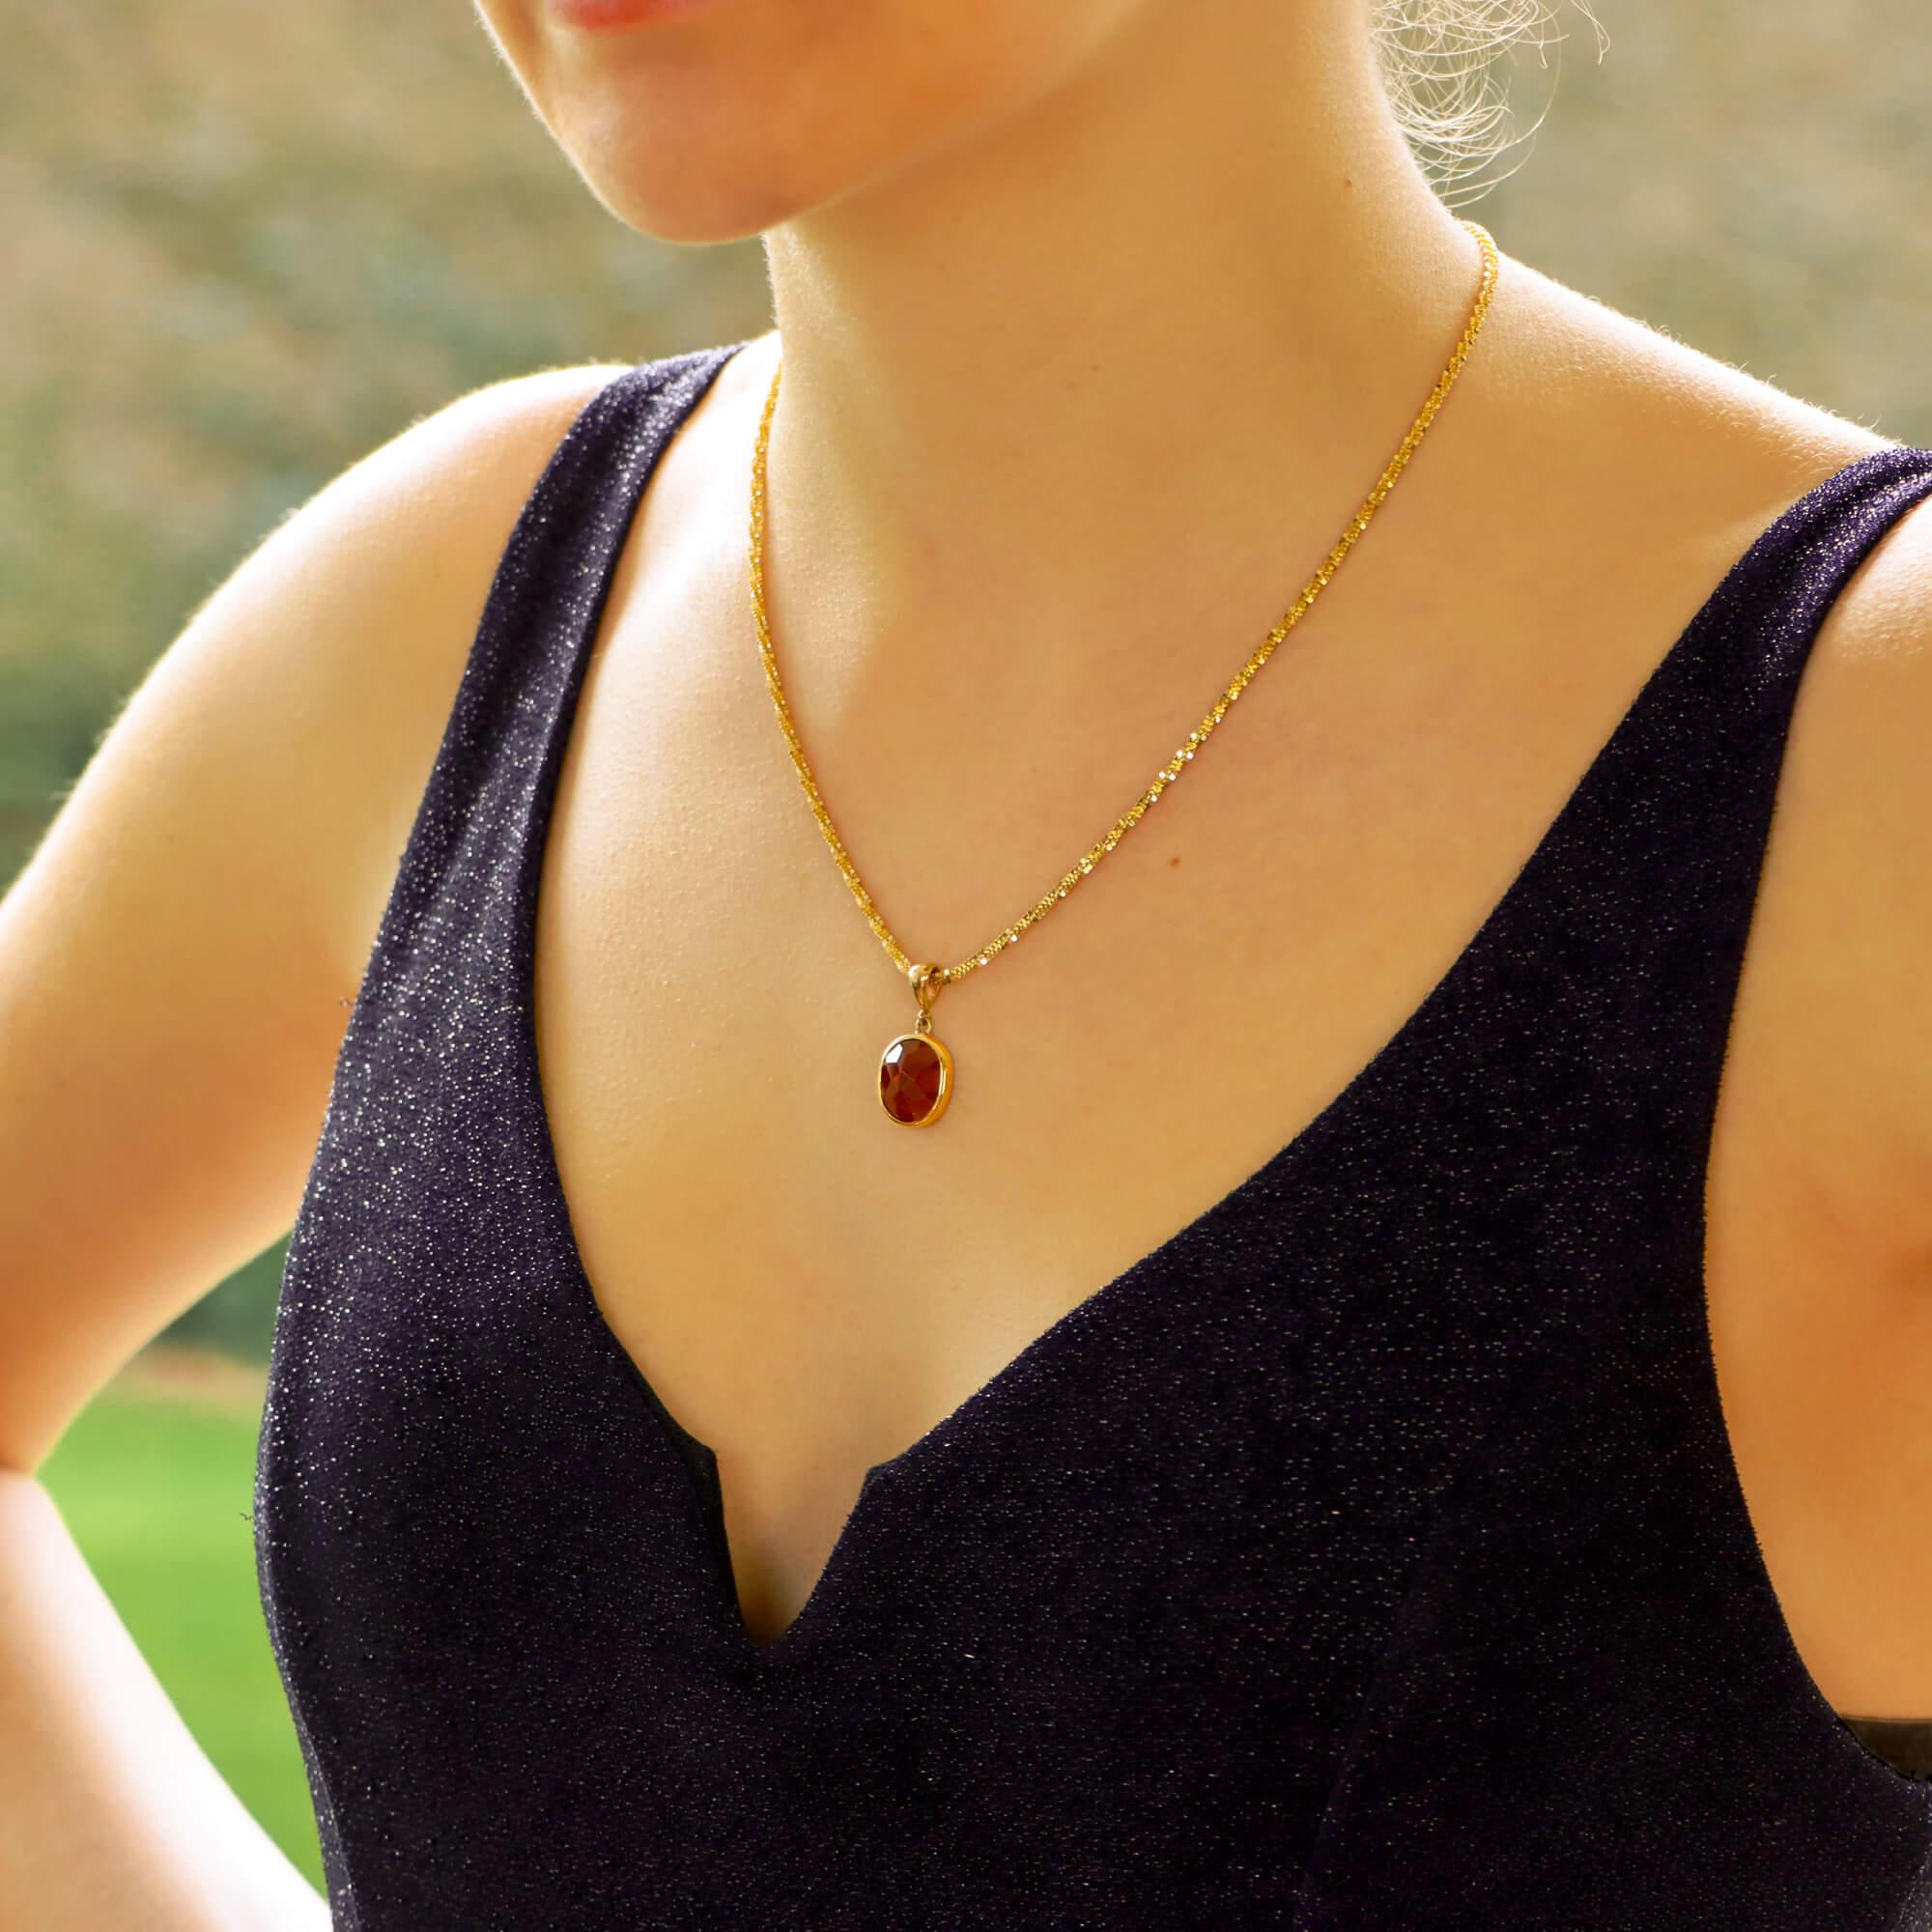 A simple yet elegant round garnet pendant set in 9k yellow gold.

The pendant is set with a lovely 4.92ct red garnet. Due to the depth of the garnet the colour is a subtle shade and isn’t too vibrant so catches the light beautifully once around the